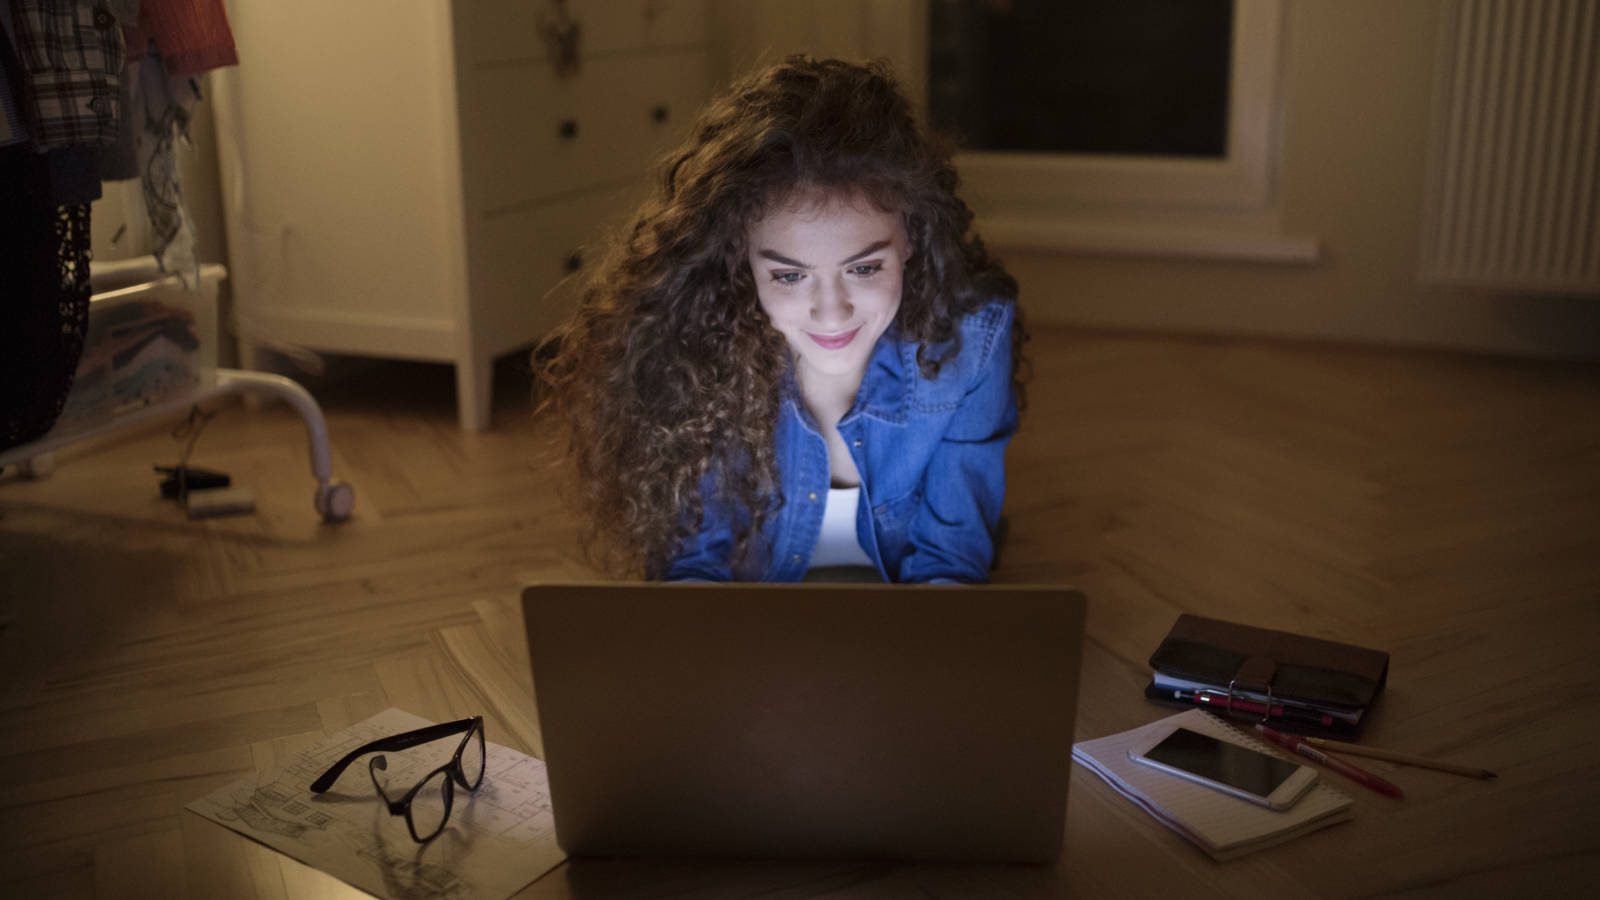 Smiling student on computer in bedroom researching how to save graduation money